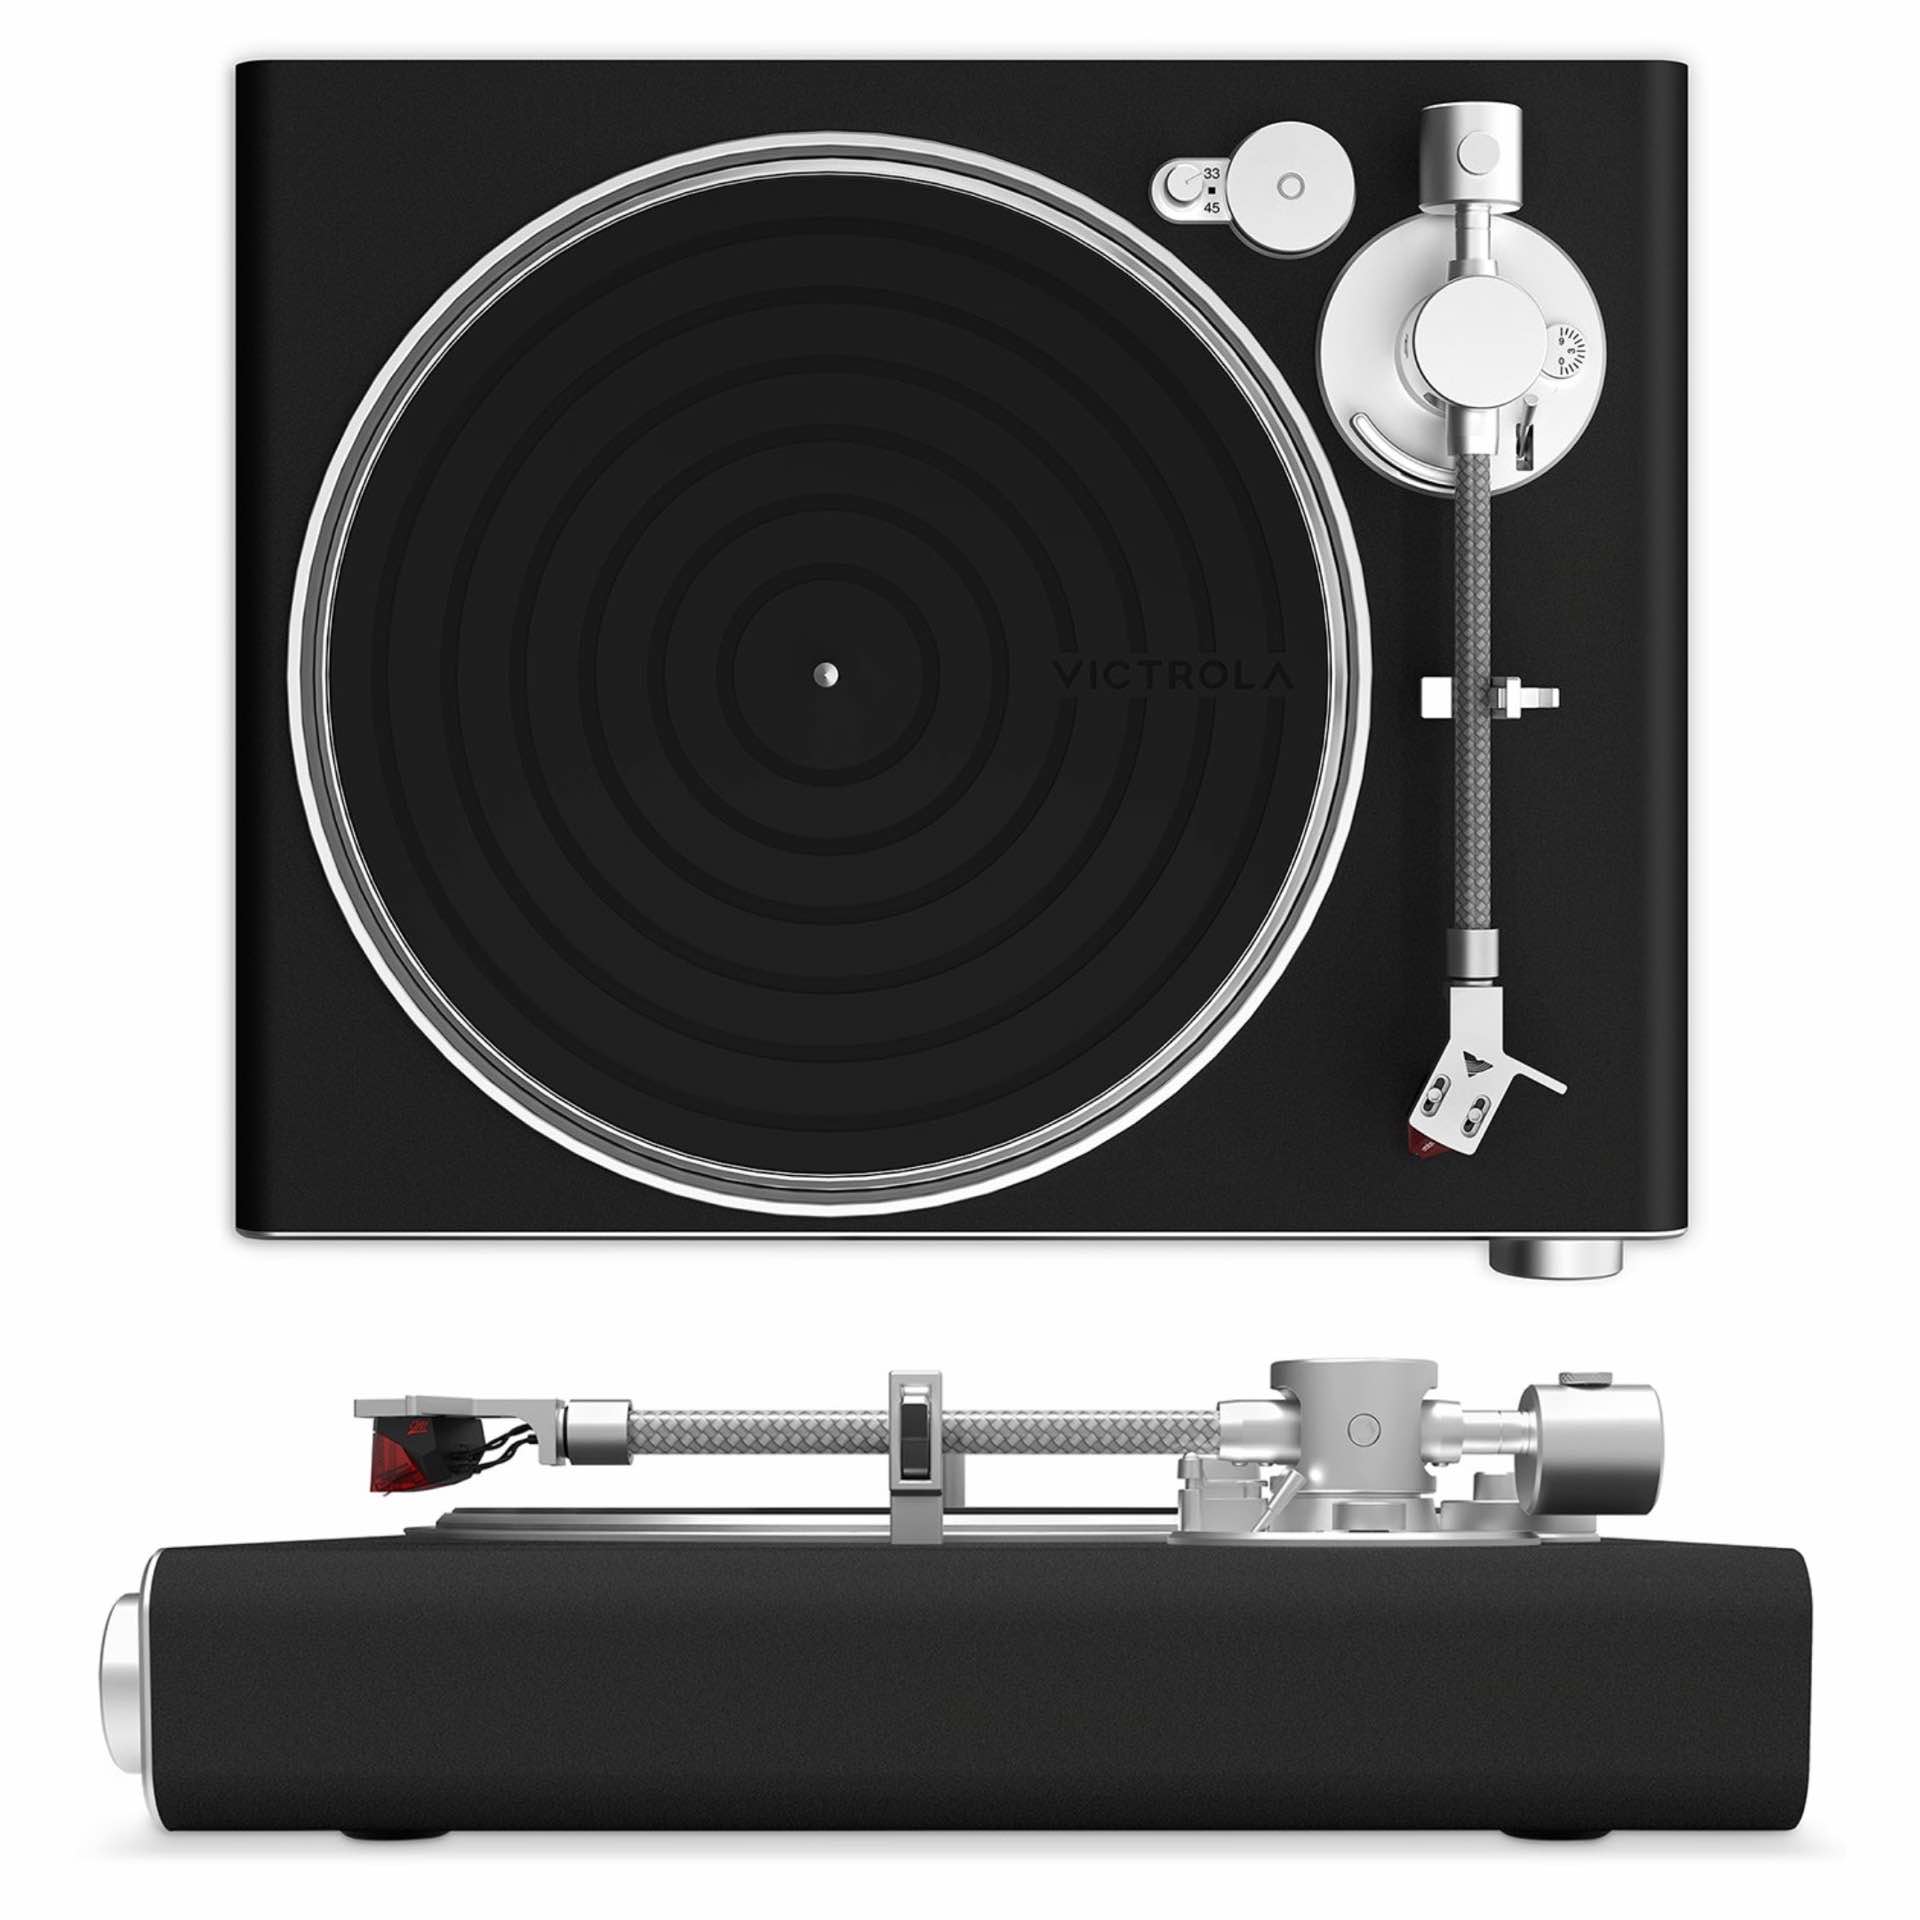 victrola-stream-carbon-sonos-enabled-turntable-top-and-side